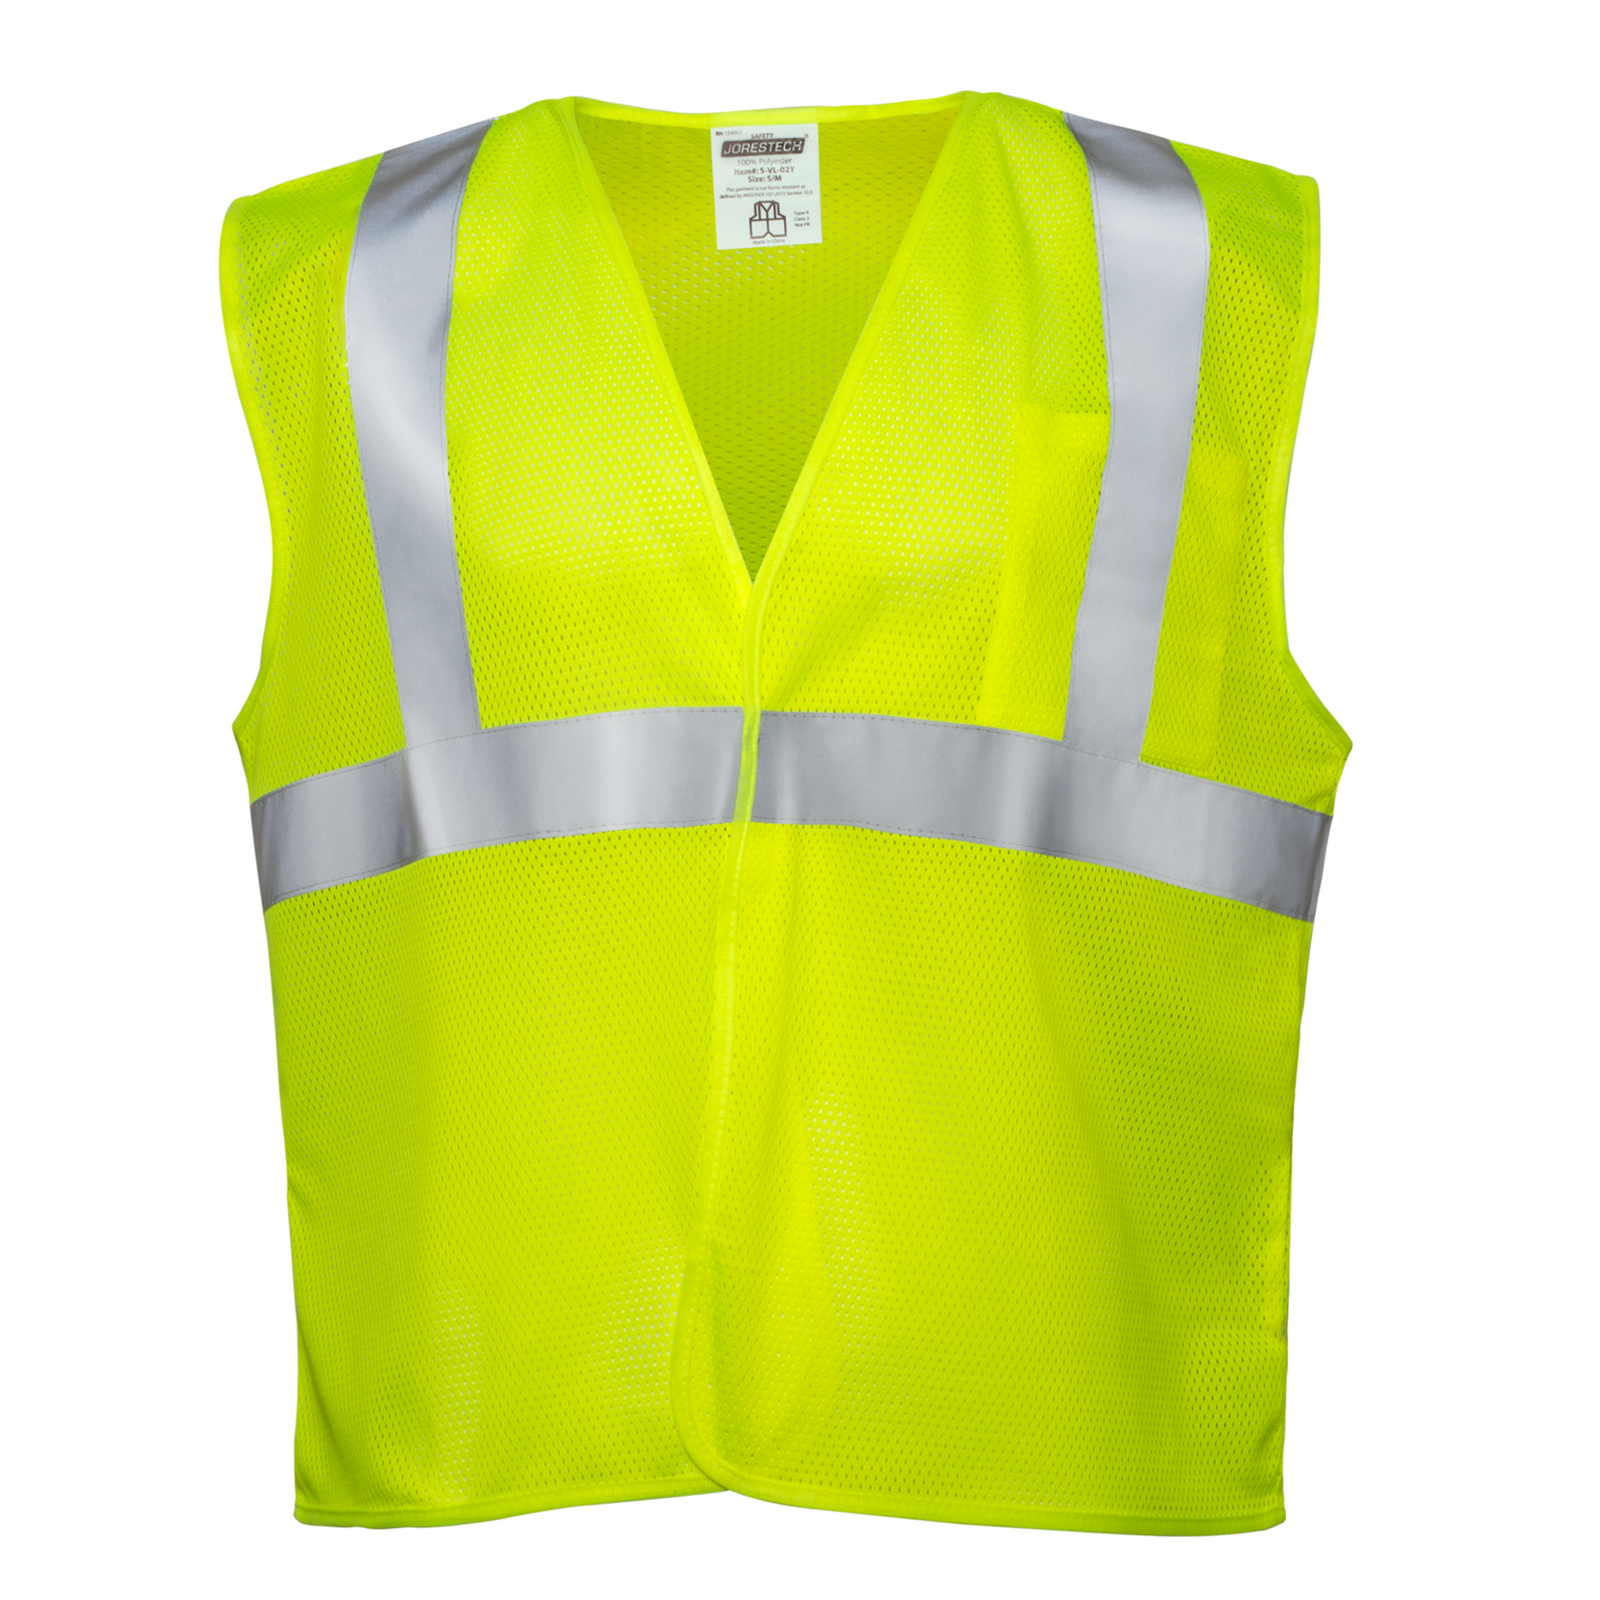 Front view of the lime JORESTECH printed hi-vis mesh safety vest with 2 inches reflective strips